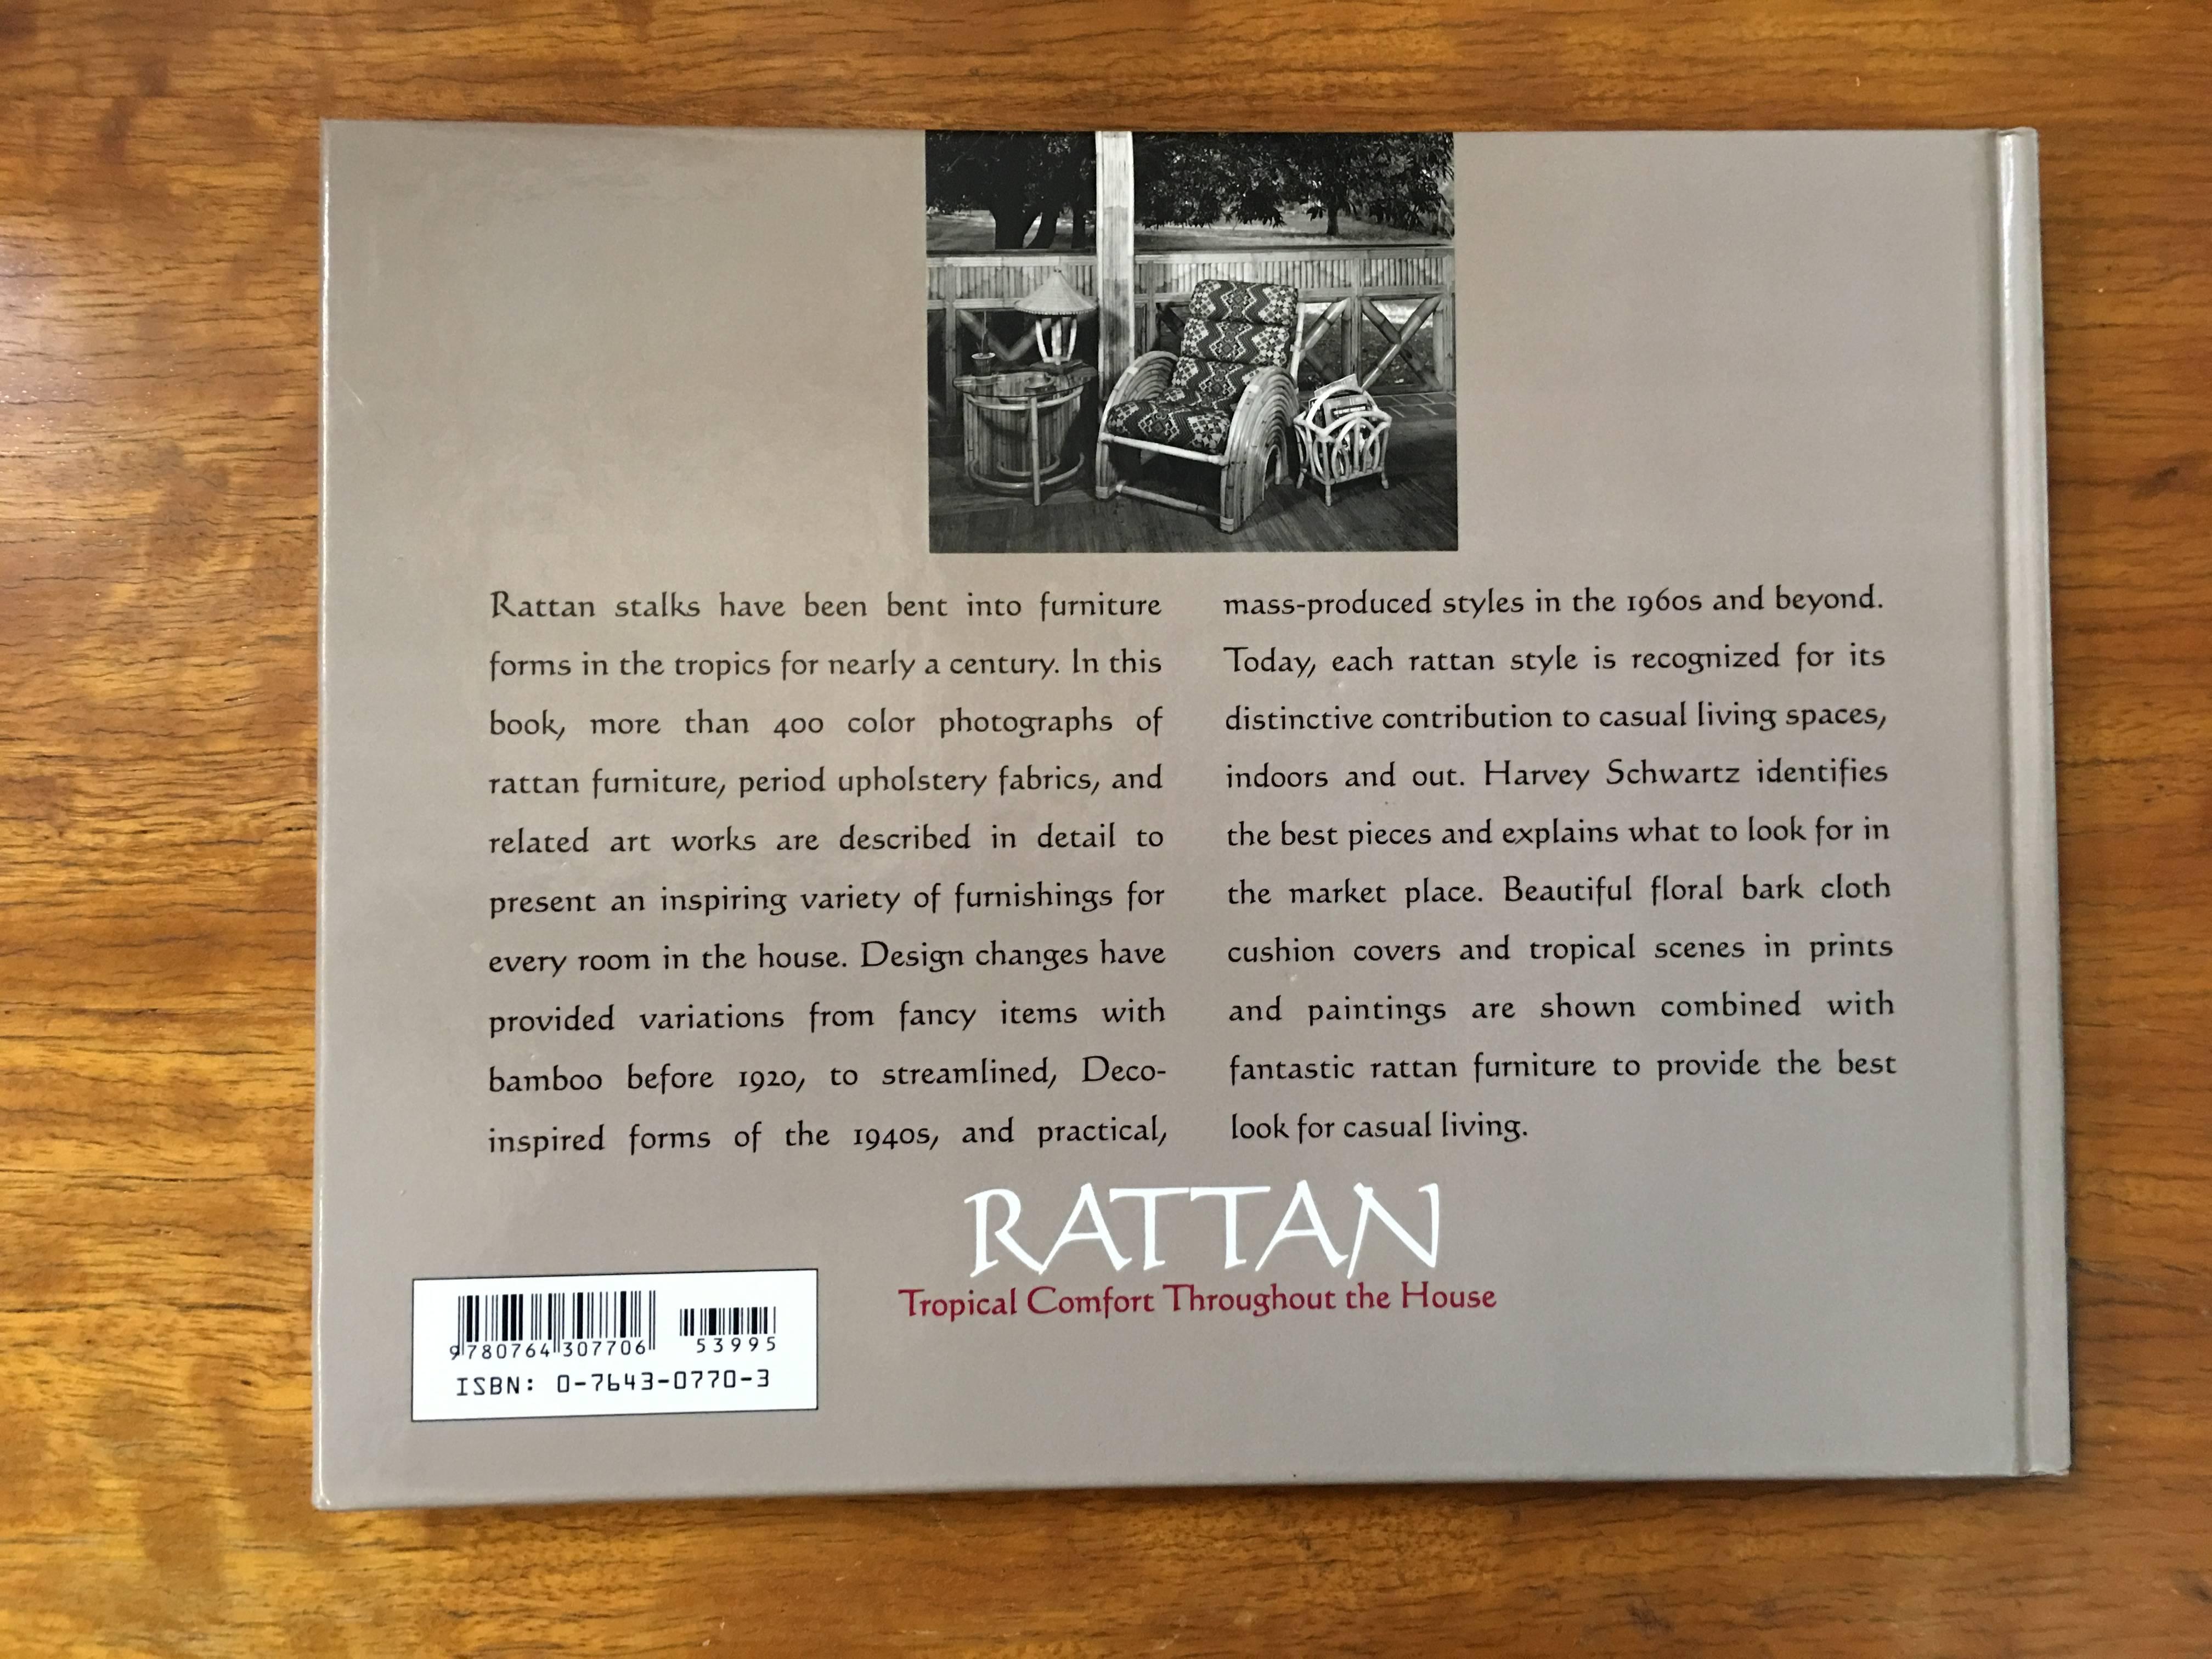 Original brand new 1st edition copy of Rattan Furniture: Tropical Comfort Throughout The House signed by author Harvey Schwartz. 

Request a personal message written by the author at no charge.

Book details

 Series: Schiffer Military History
